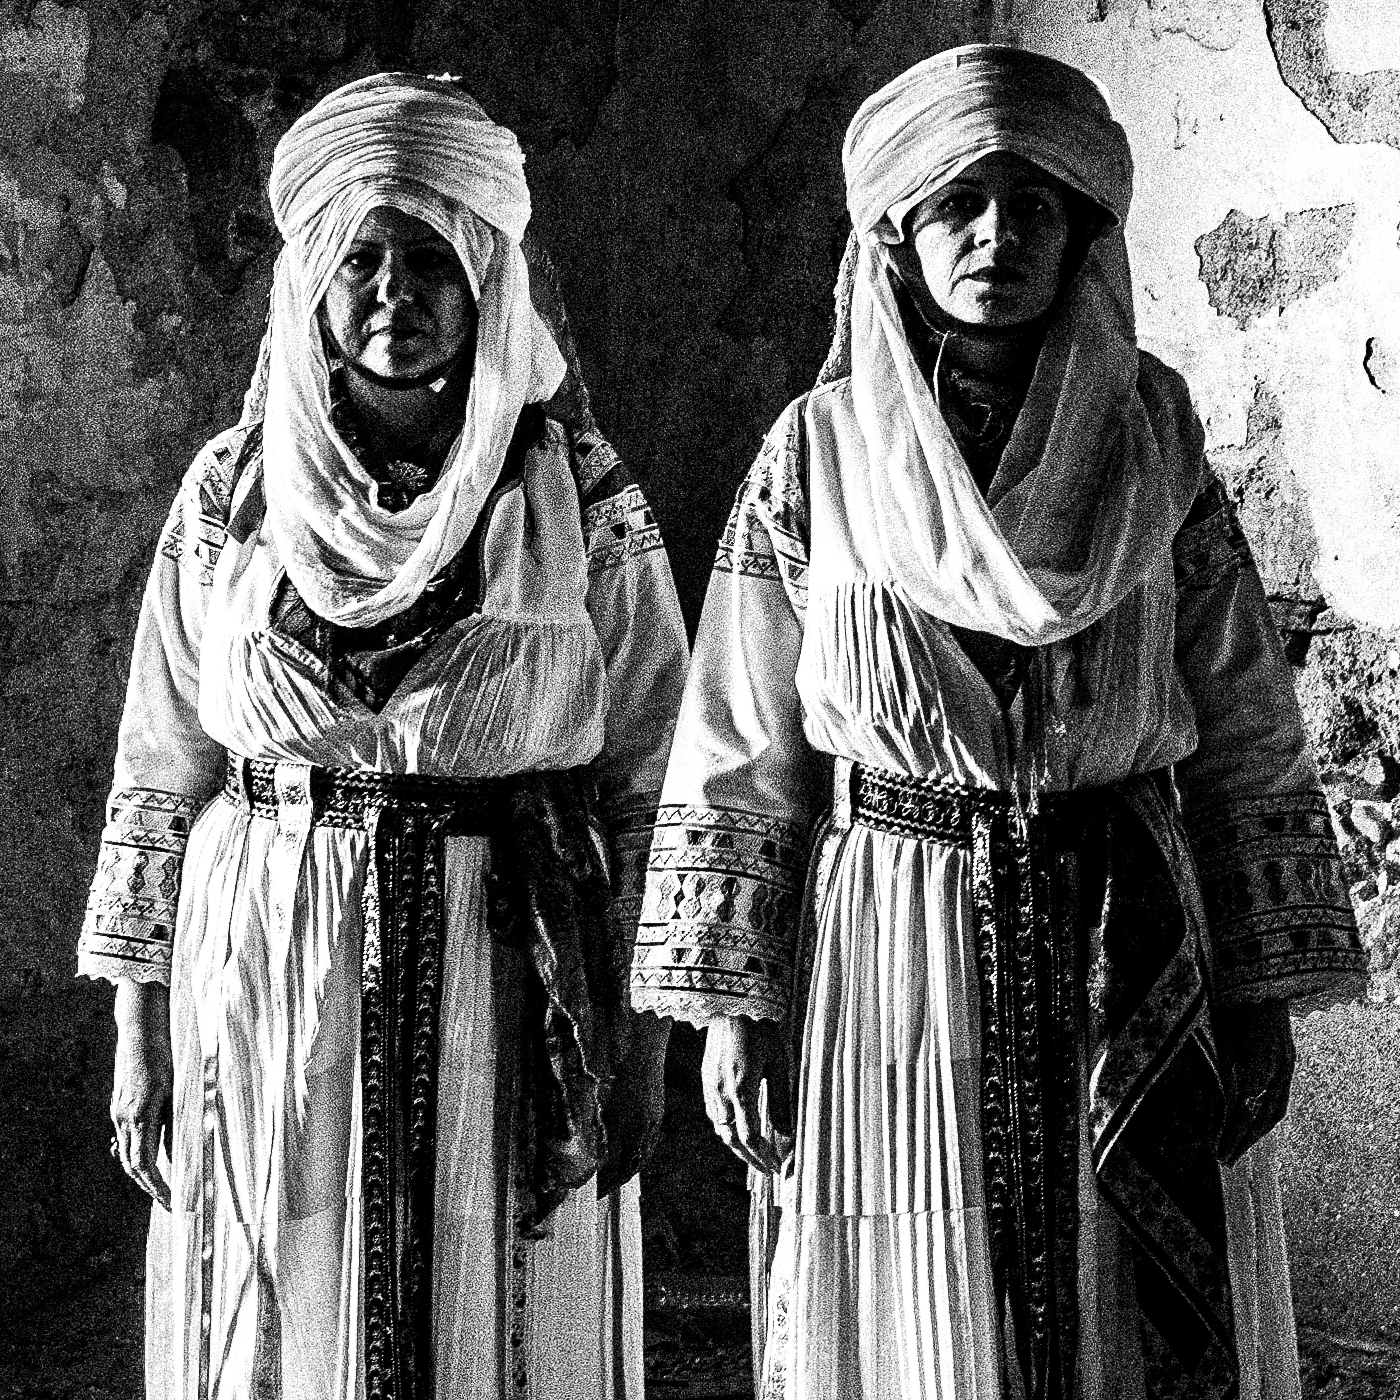 Black and White Photography Wall Art Greece | Kallamoti costumes Chios island Greece by George Tatakis - detailed view